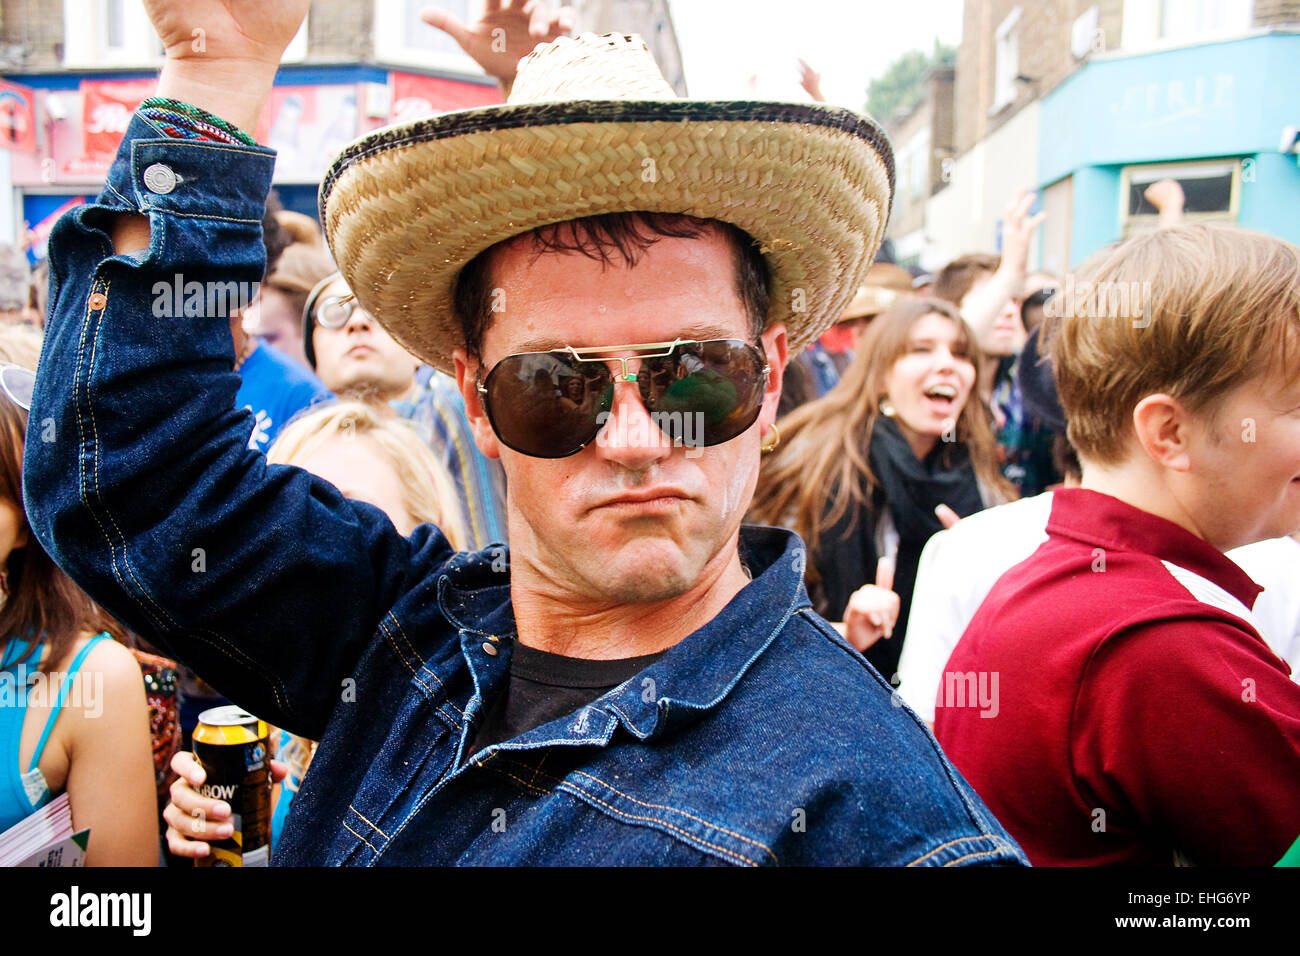 Cowboy at Gaz's Rockin' Blues sound system at the Notting Hill Carnival London. Stock Photo